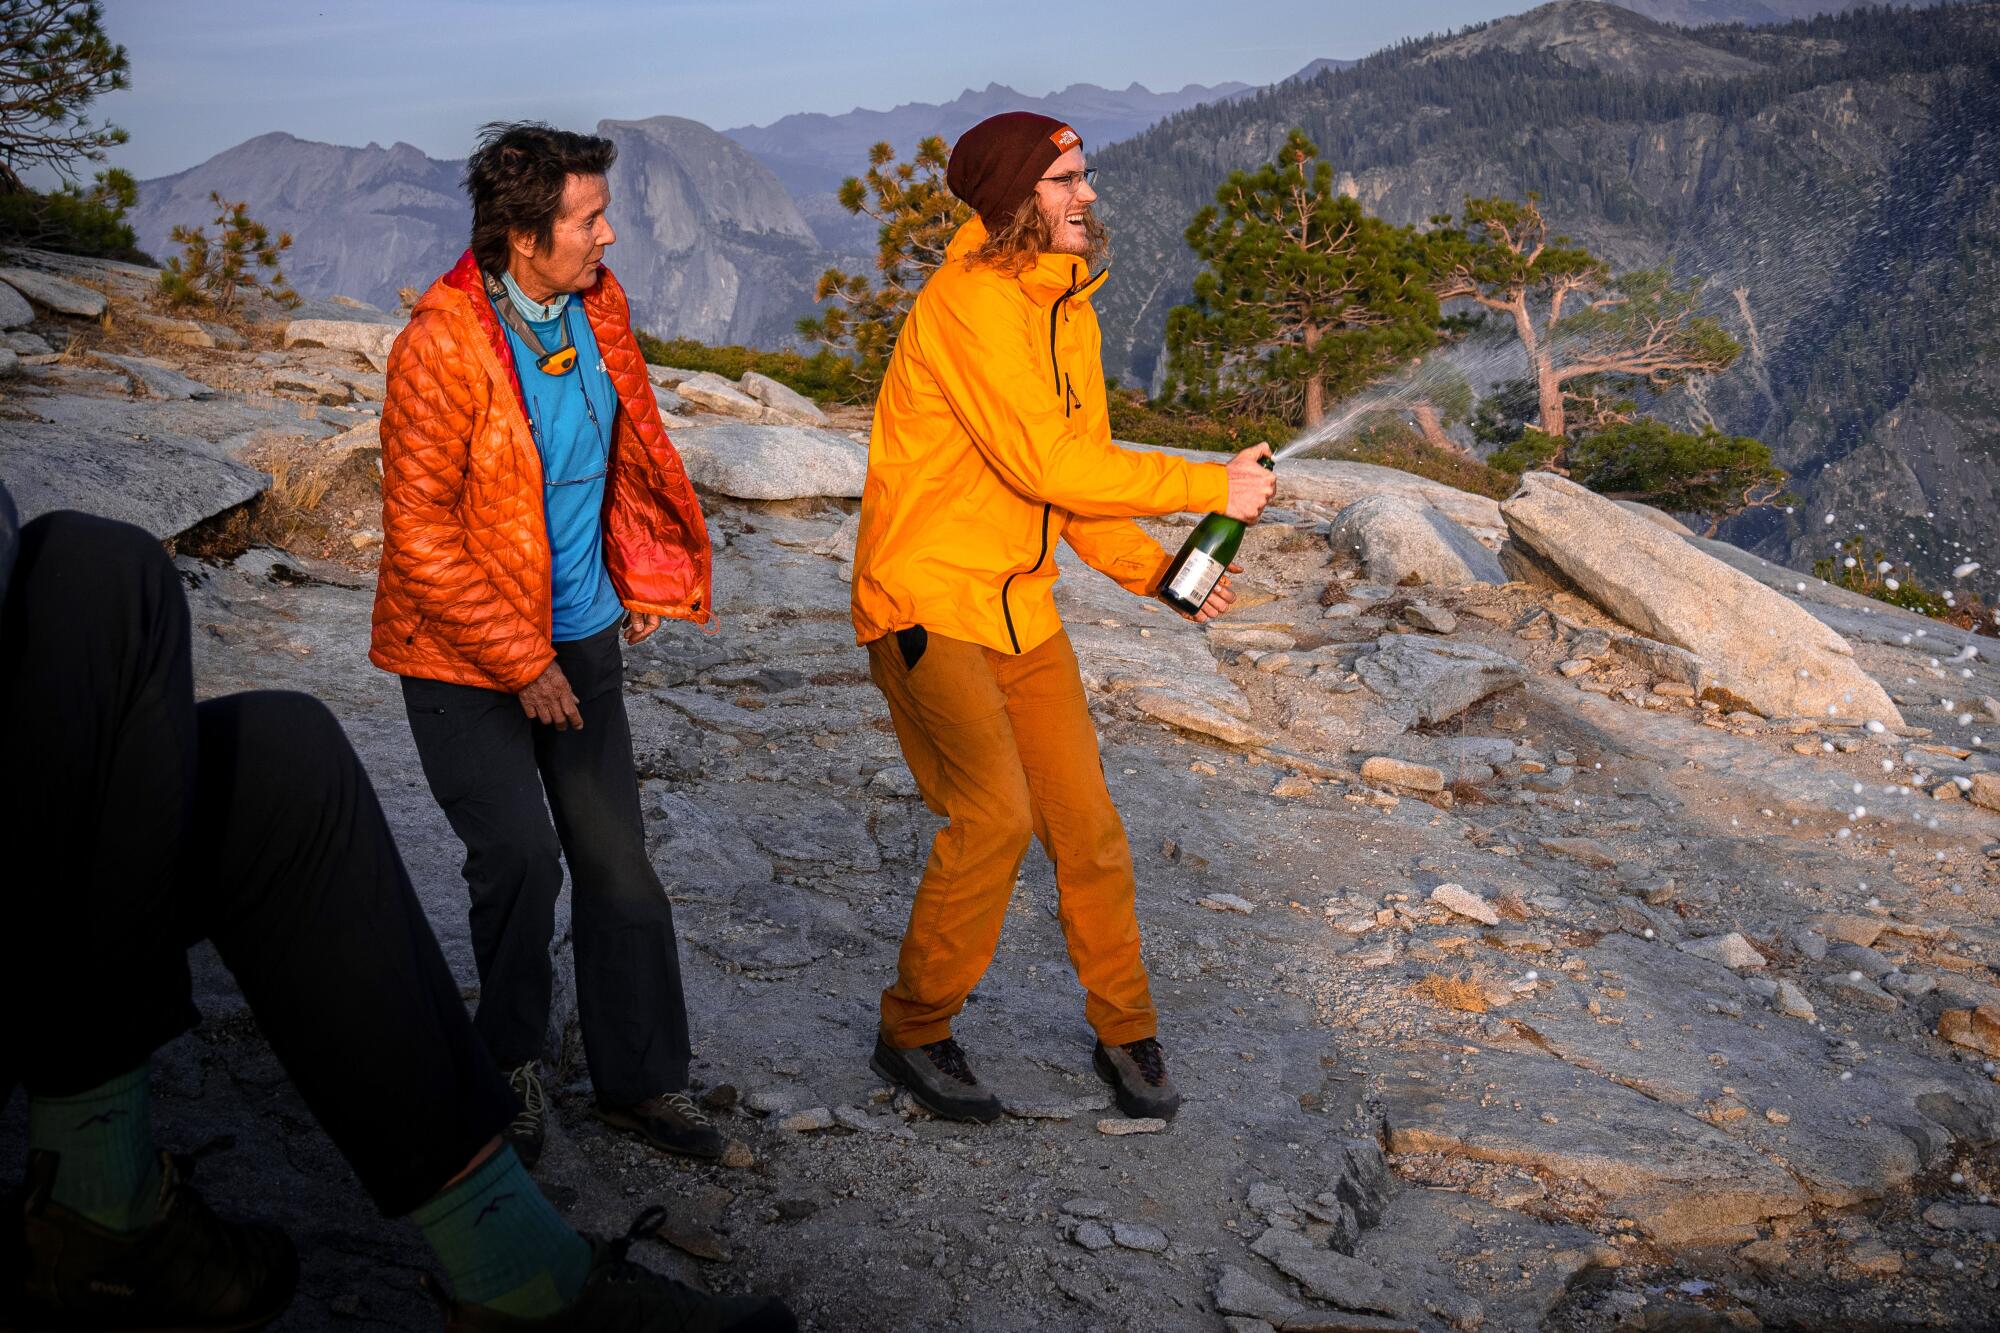 Dierdre Wolownick and Garet McMackin celebrate atop El Capitan in September